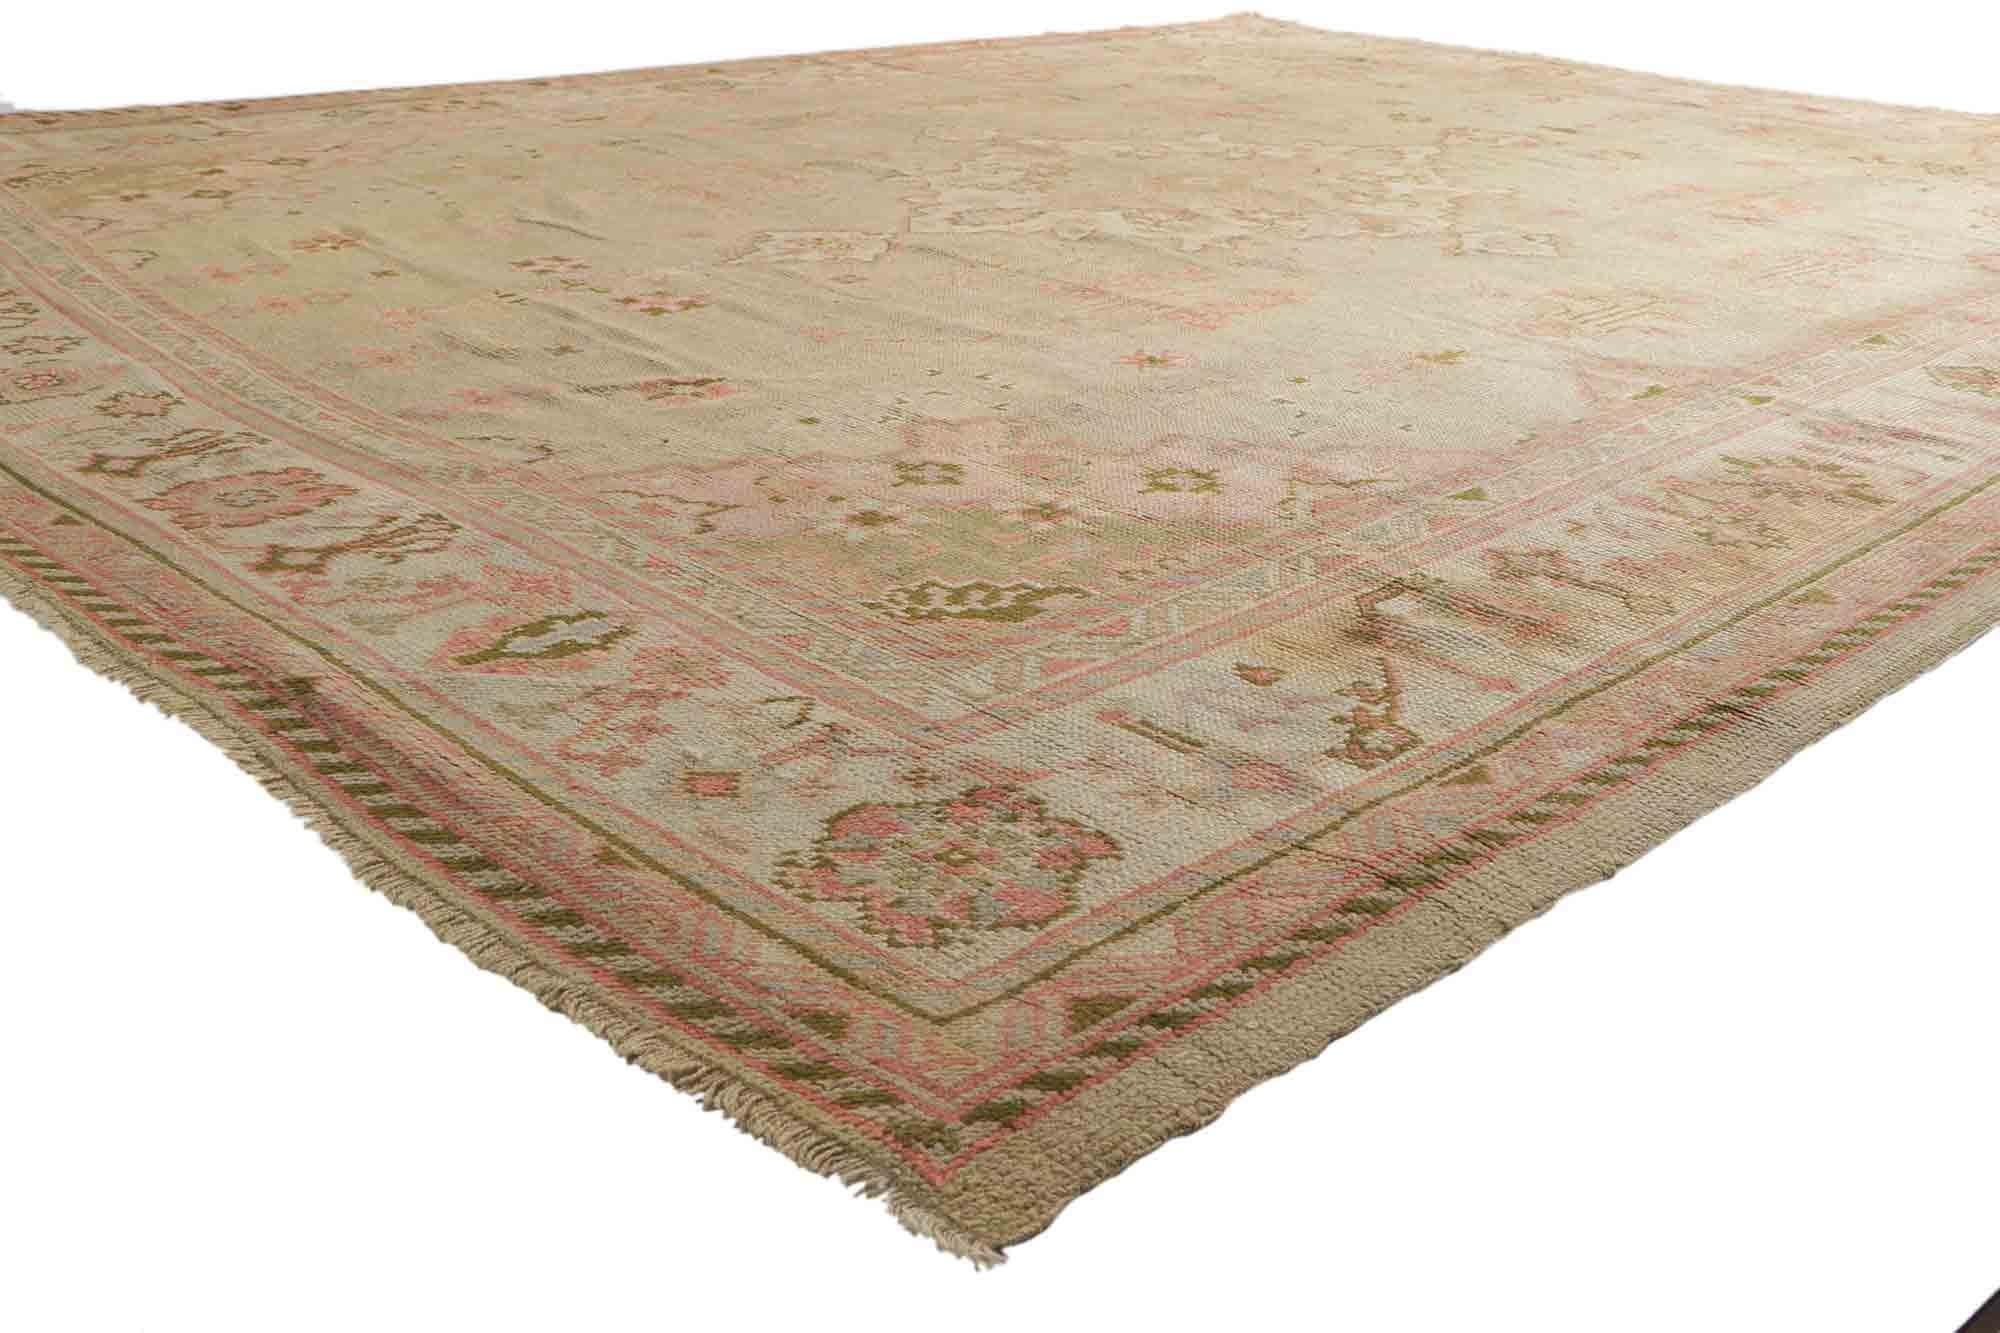 73571 Antique Turkish Oushak Rug with English Country Charm, 10'01 x 13'01.
From climbing roses and topiaries to toile and tea, this hand-knotted wool antique Turkish Oushak rug can go cozy casual chic or chateau manor formal with its English